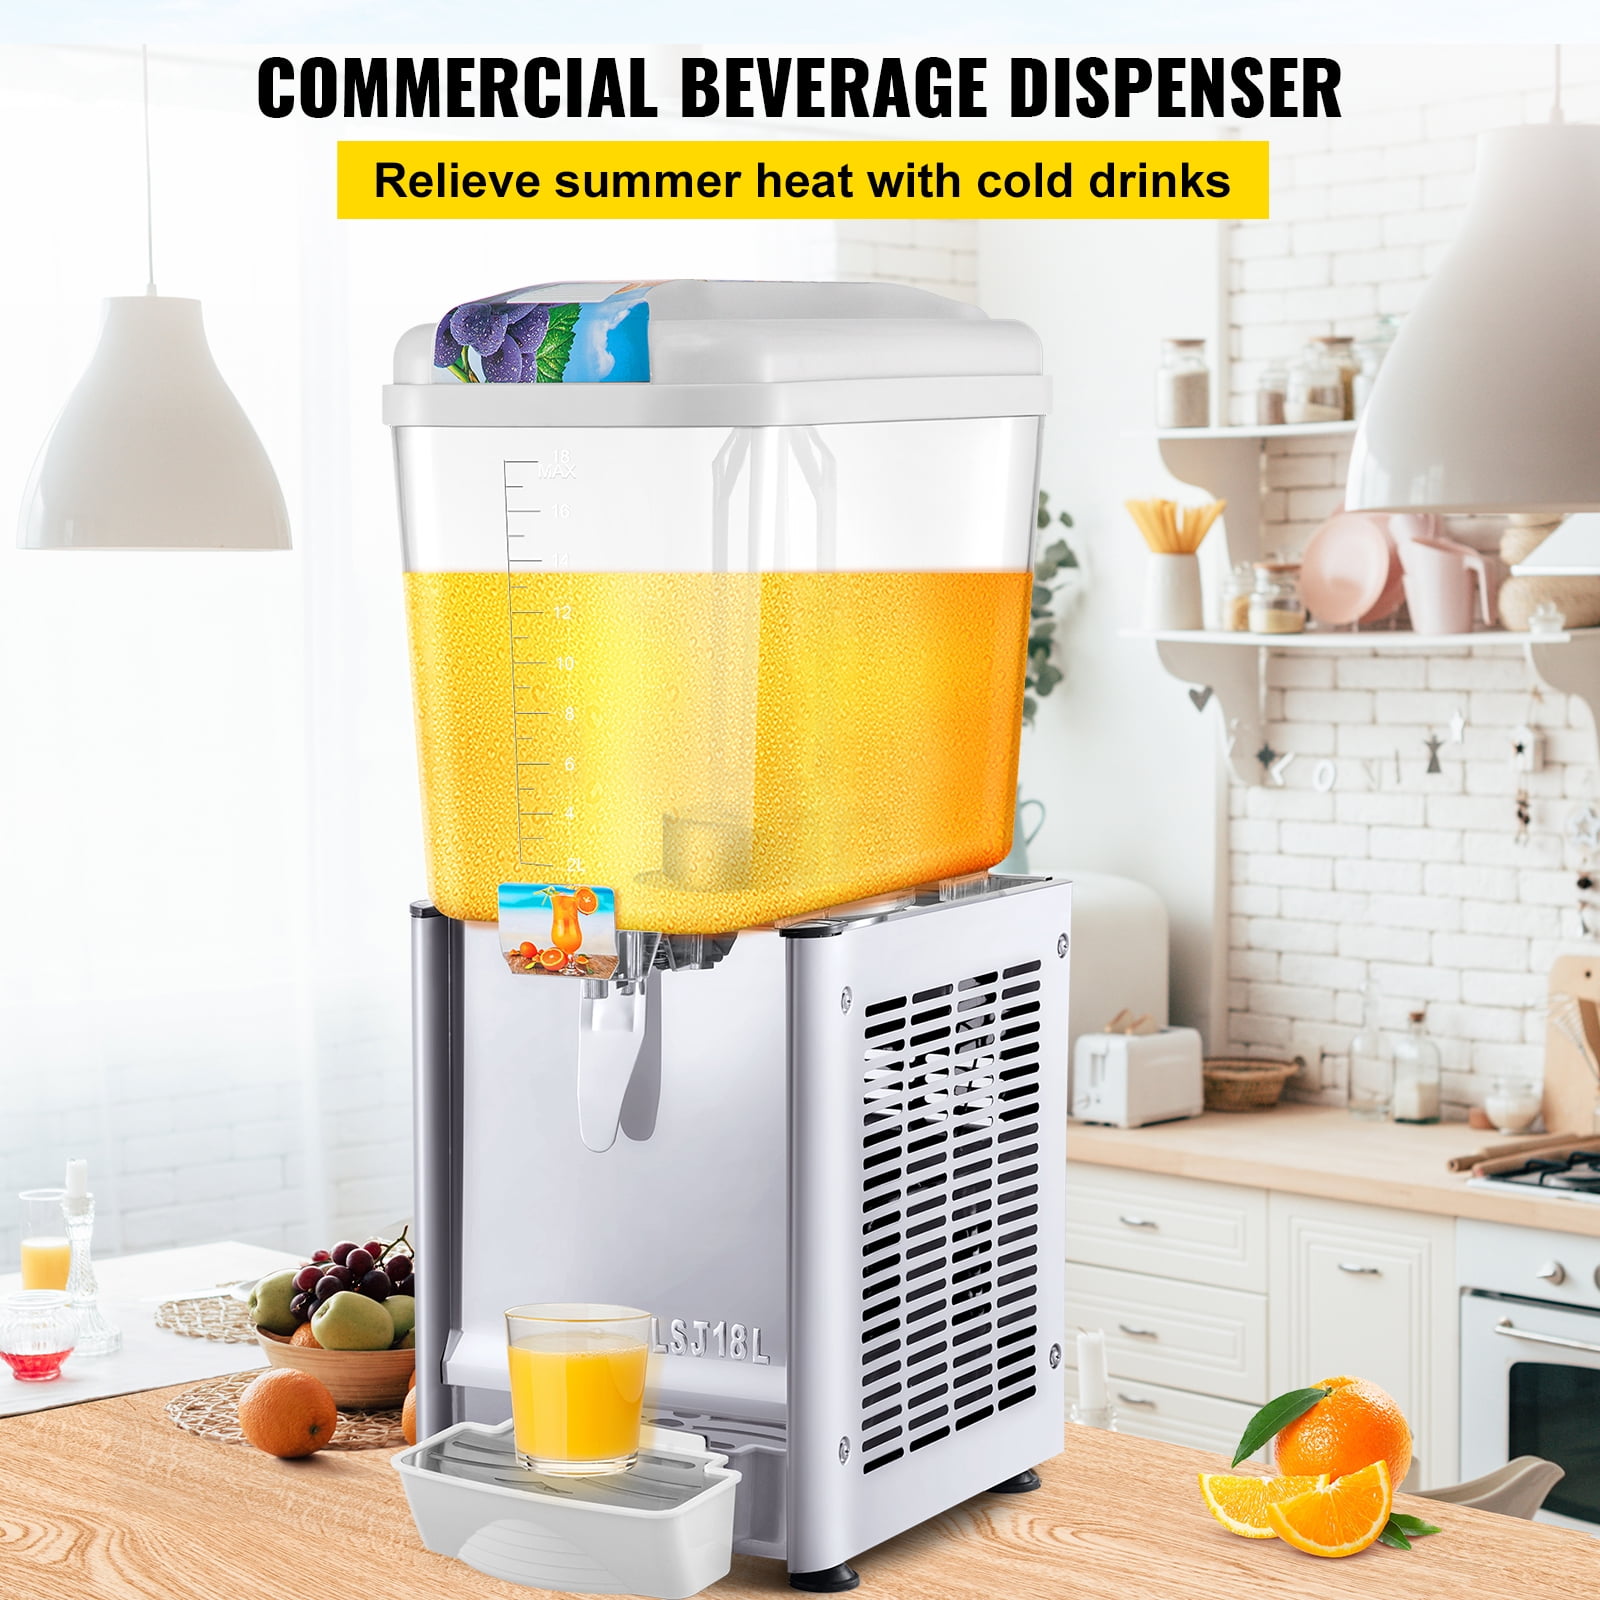 VEVOR 110V Commercial Beverage Dispenser,9.5 Gallon 36L 2 Tanks Juice Dispenser  Commercial,18 Liter Per Tank 300W Stainless Steel Food Grade Material Ice  Tea Drink Dispenser Equipped with Thermostat Controller